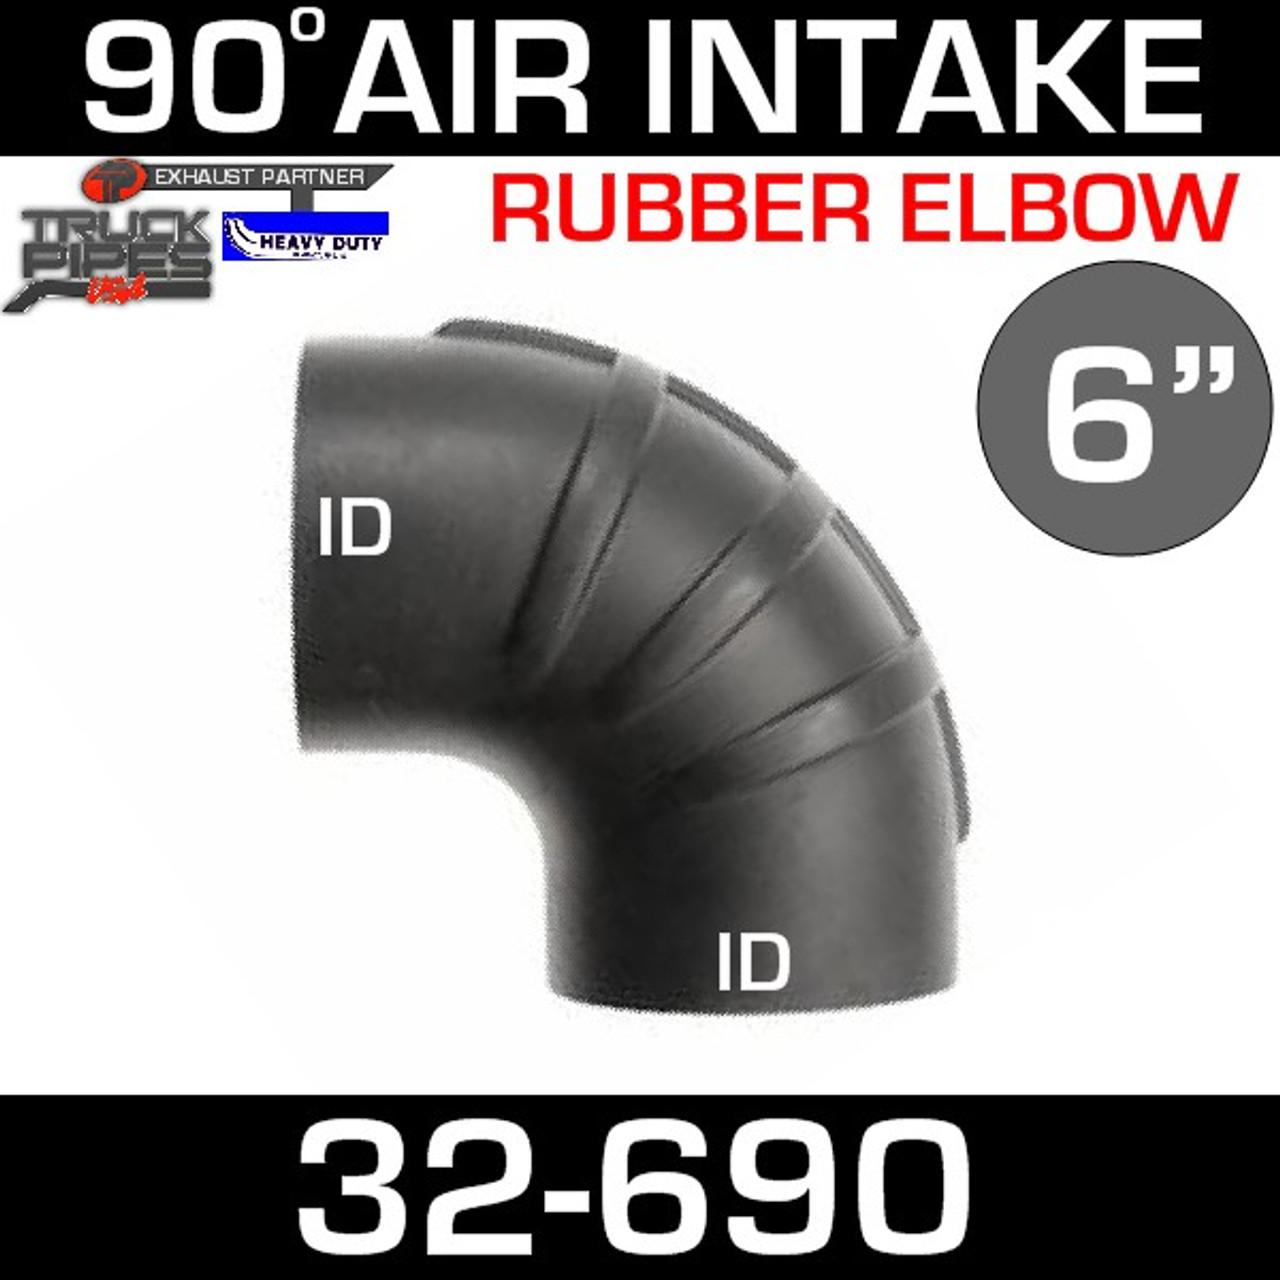 Rubber Elbow 6 ID X 90 Degree: Intake Hoses